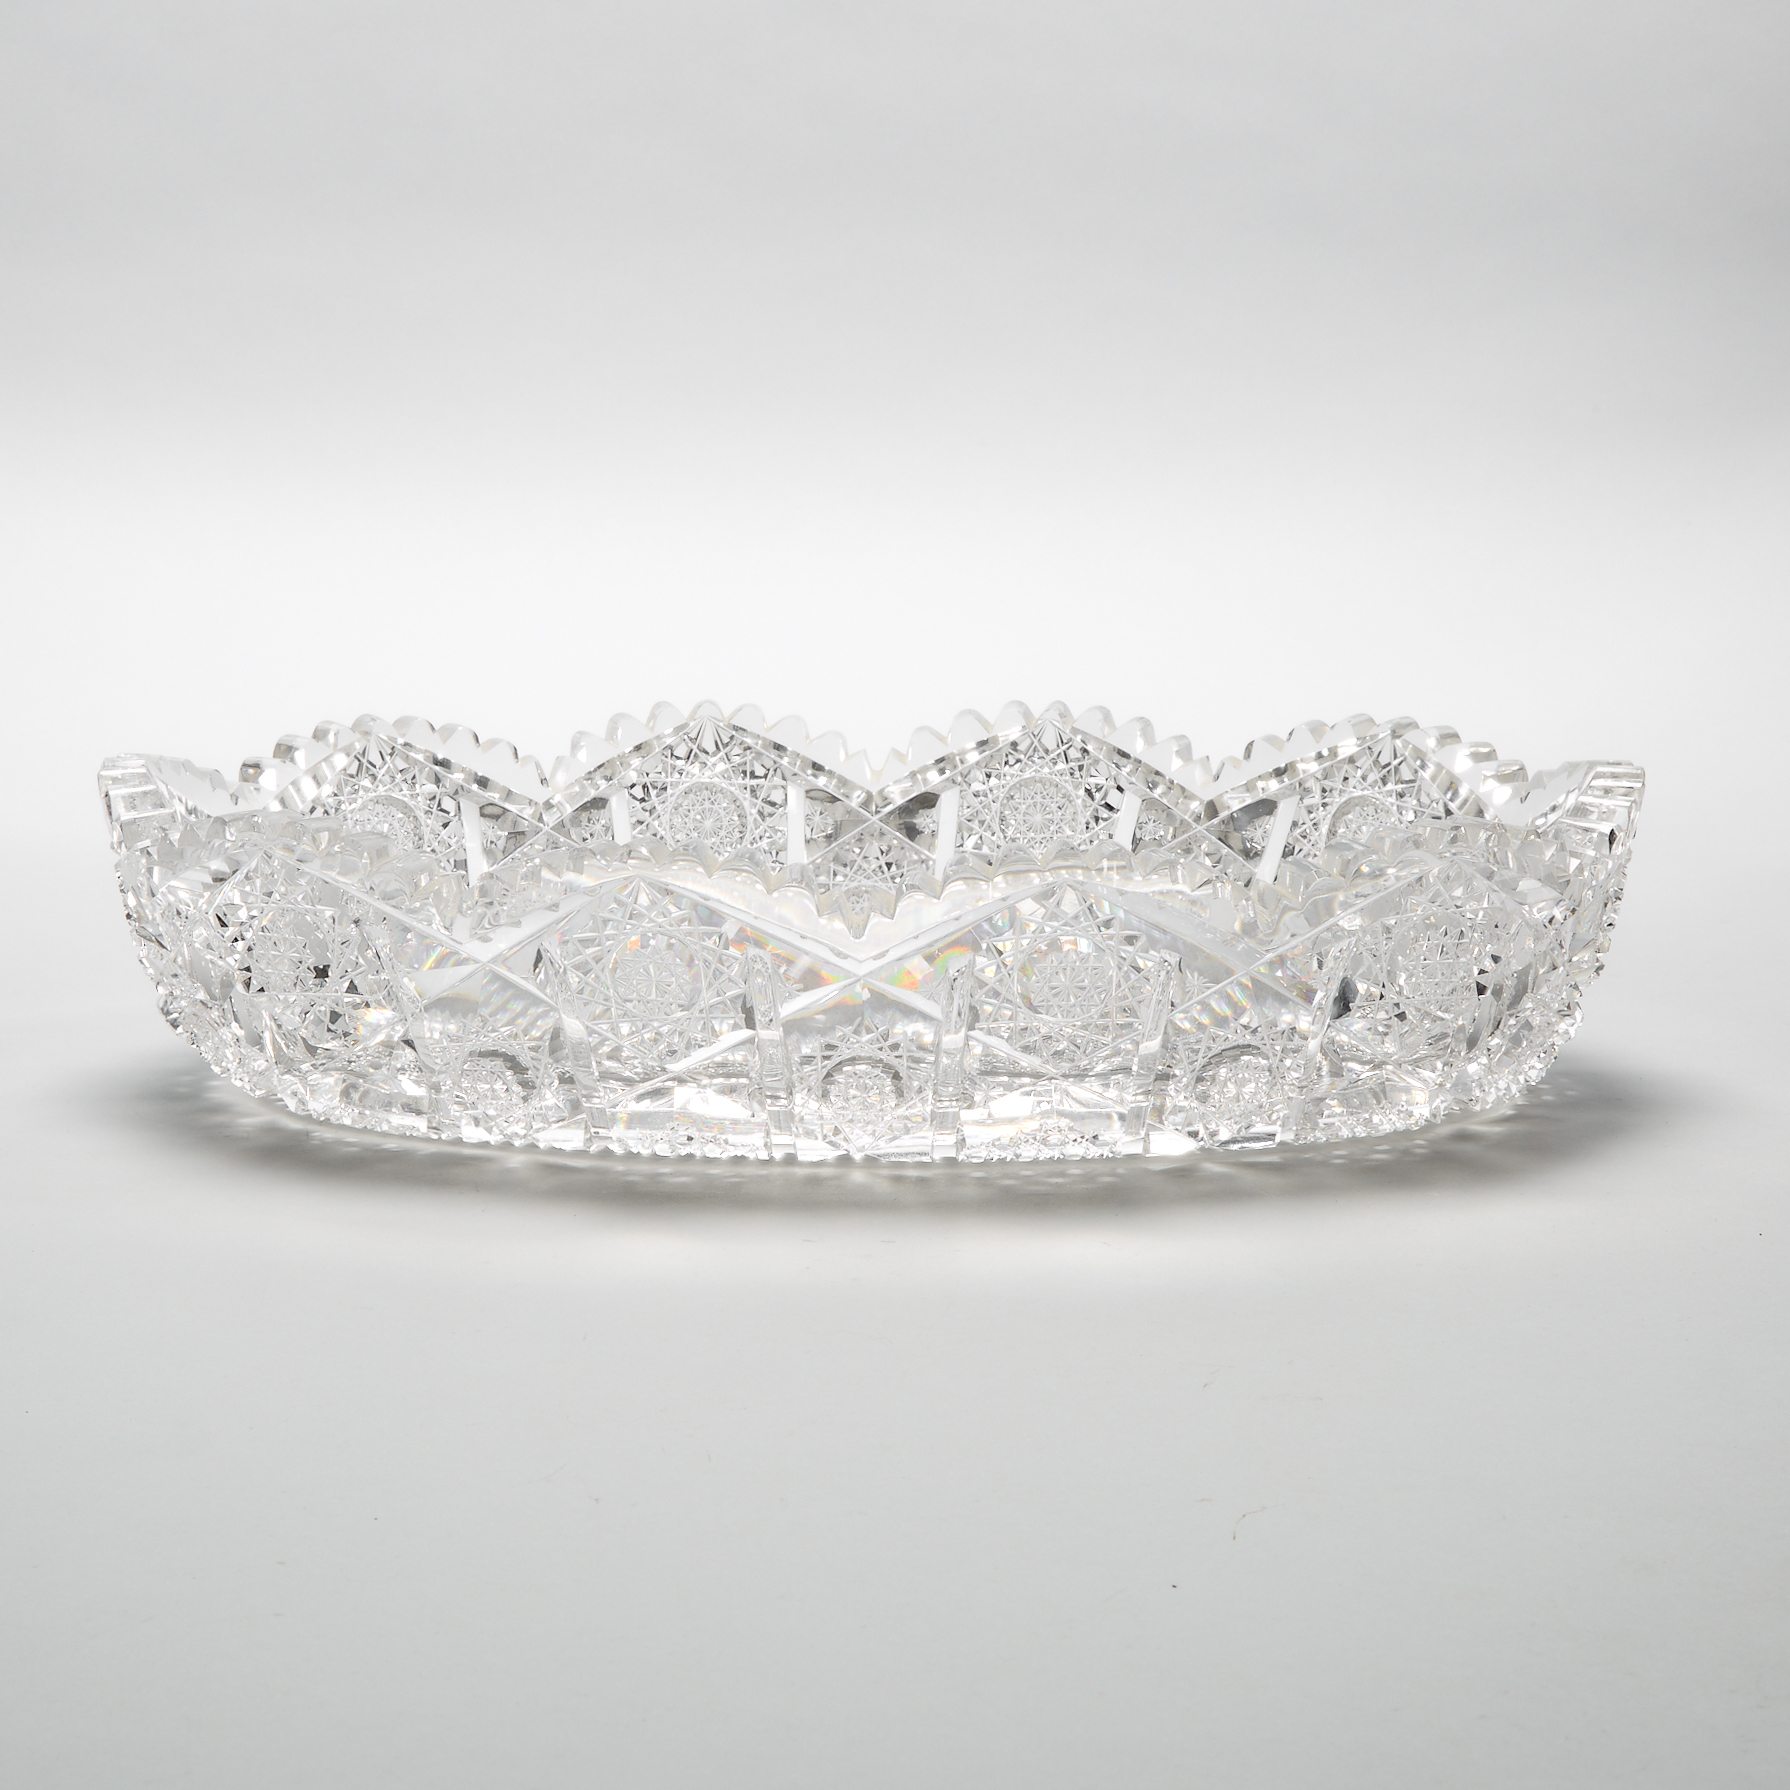 North American Cut Glass Oval Bowl, early 20th century